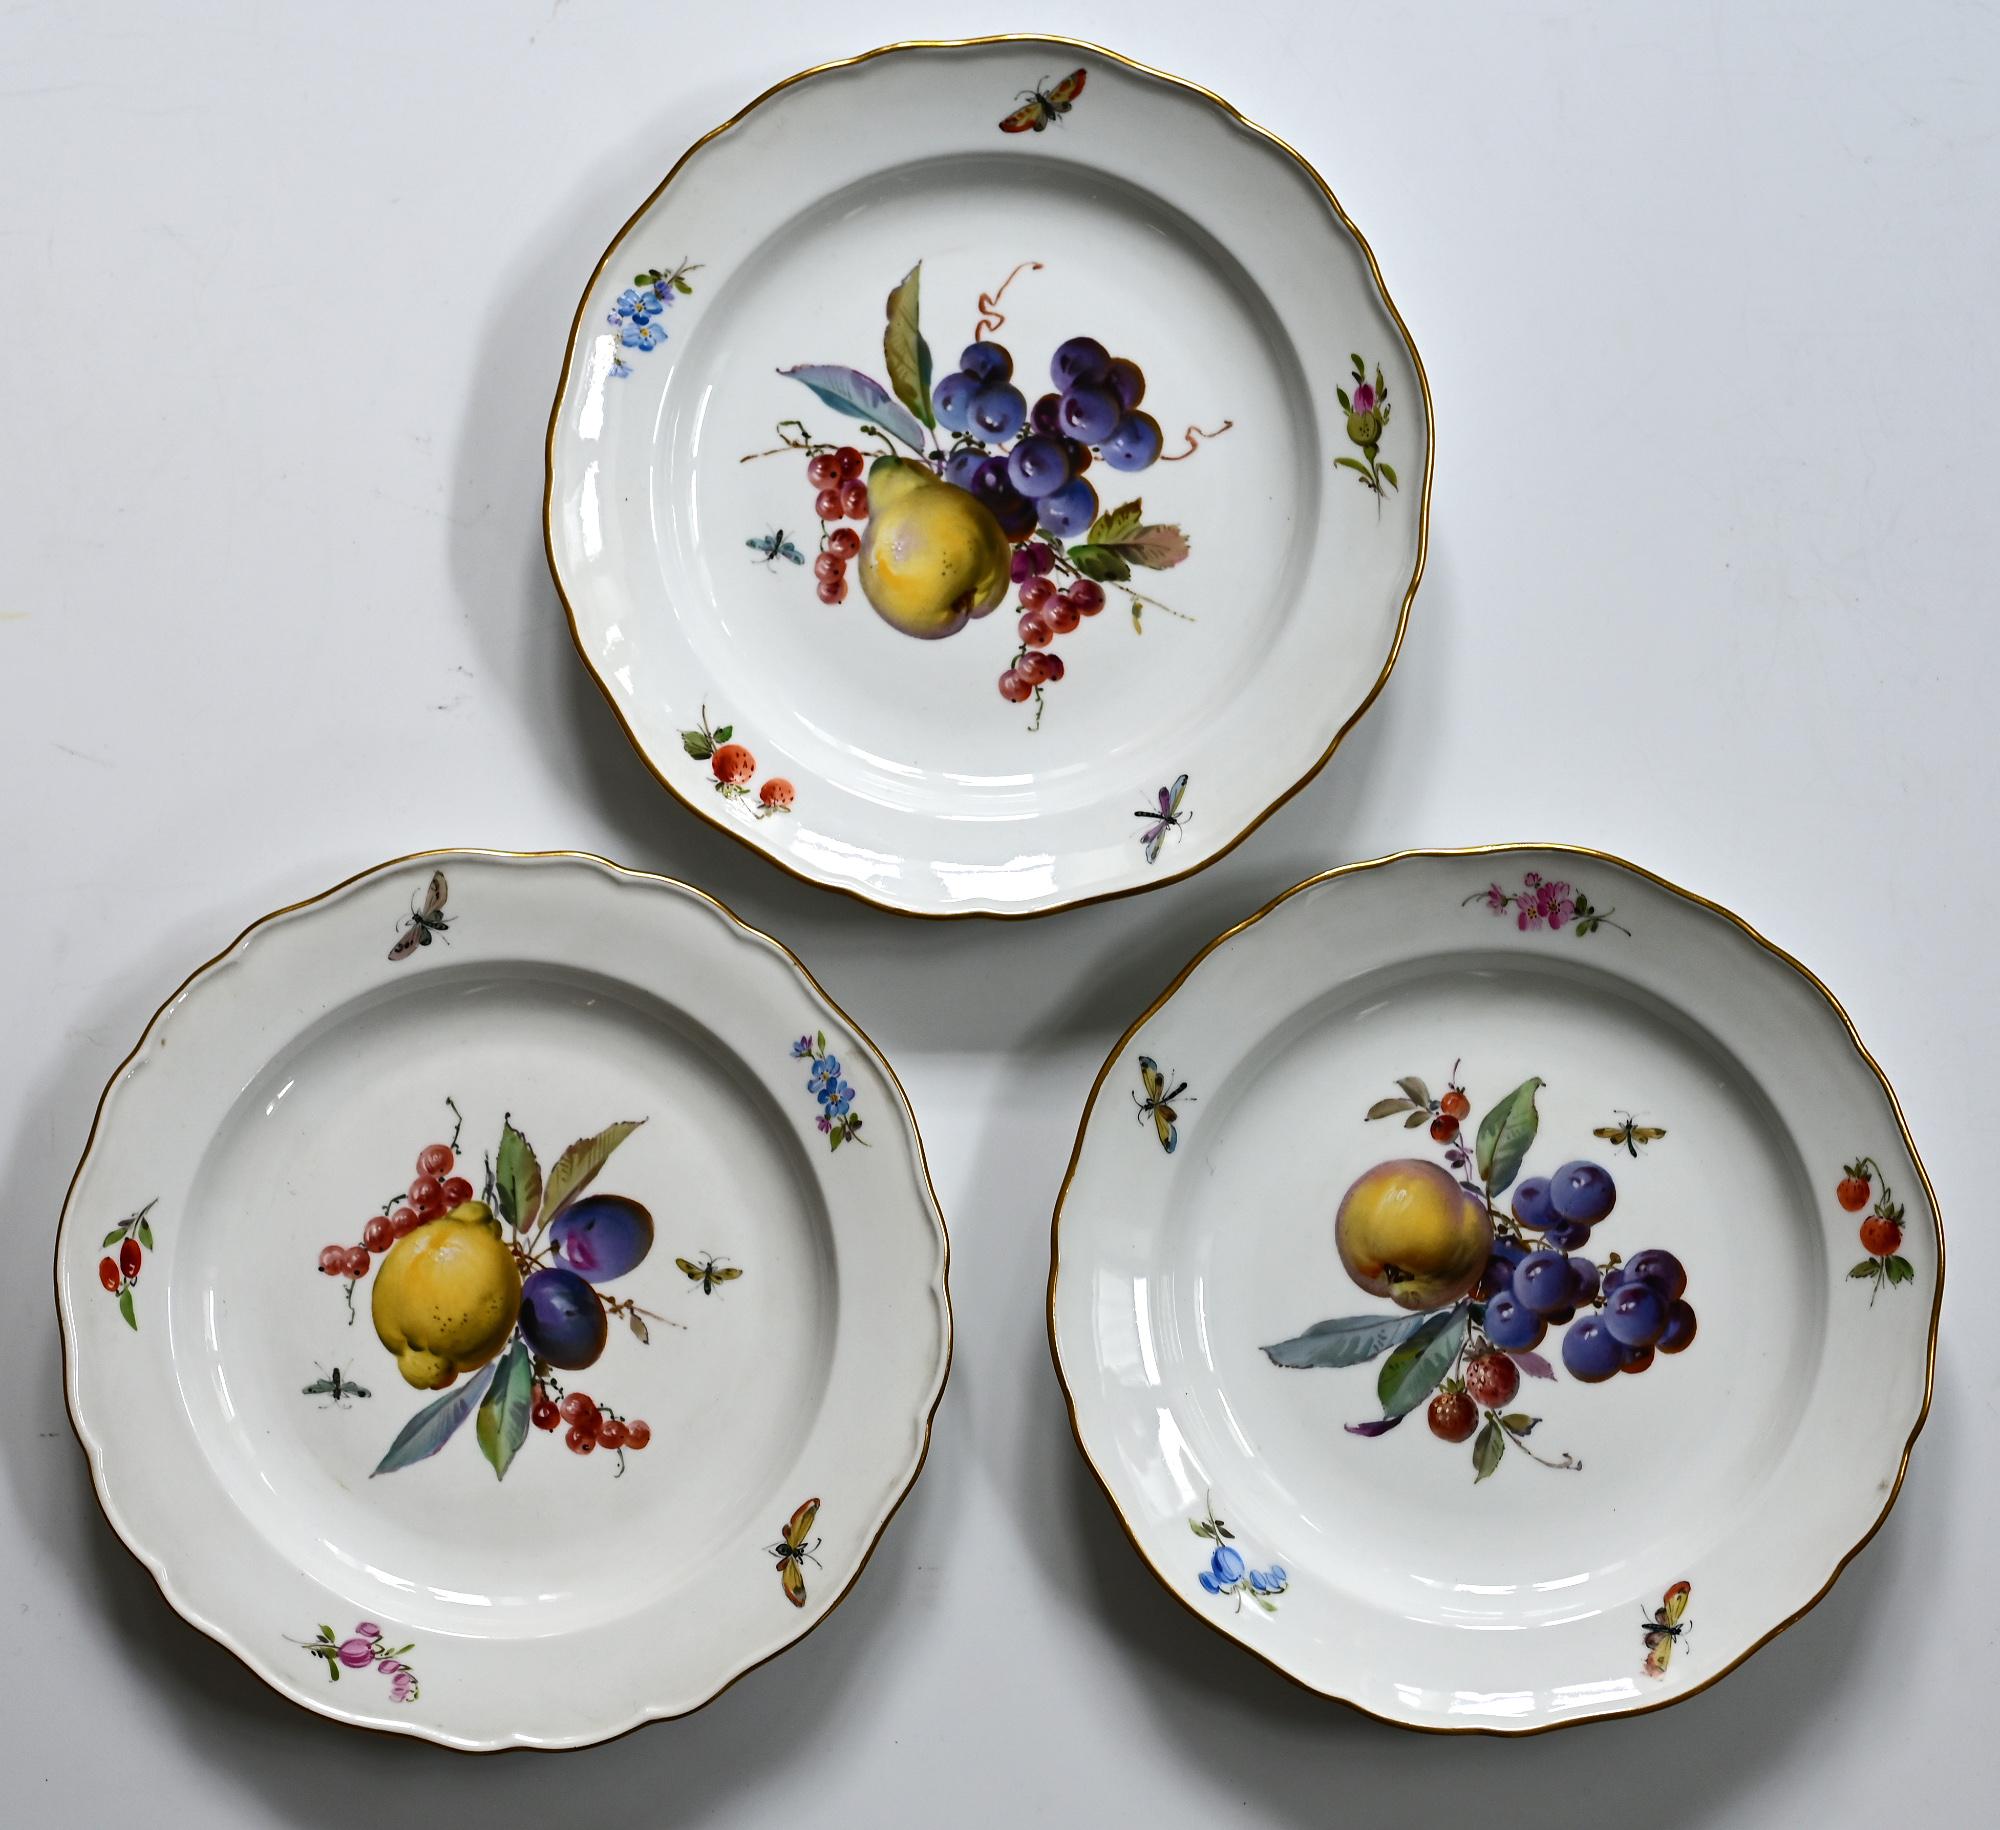 A set of 12 Meissen porcelain plates, with fruits, insects and flowers,
19.Jhdt. Meissen, Saxonia.
Beautifully very fine hand painted the outer rim gilded
Underglaze blue crossed swords mark to the reverse.